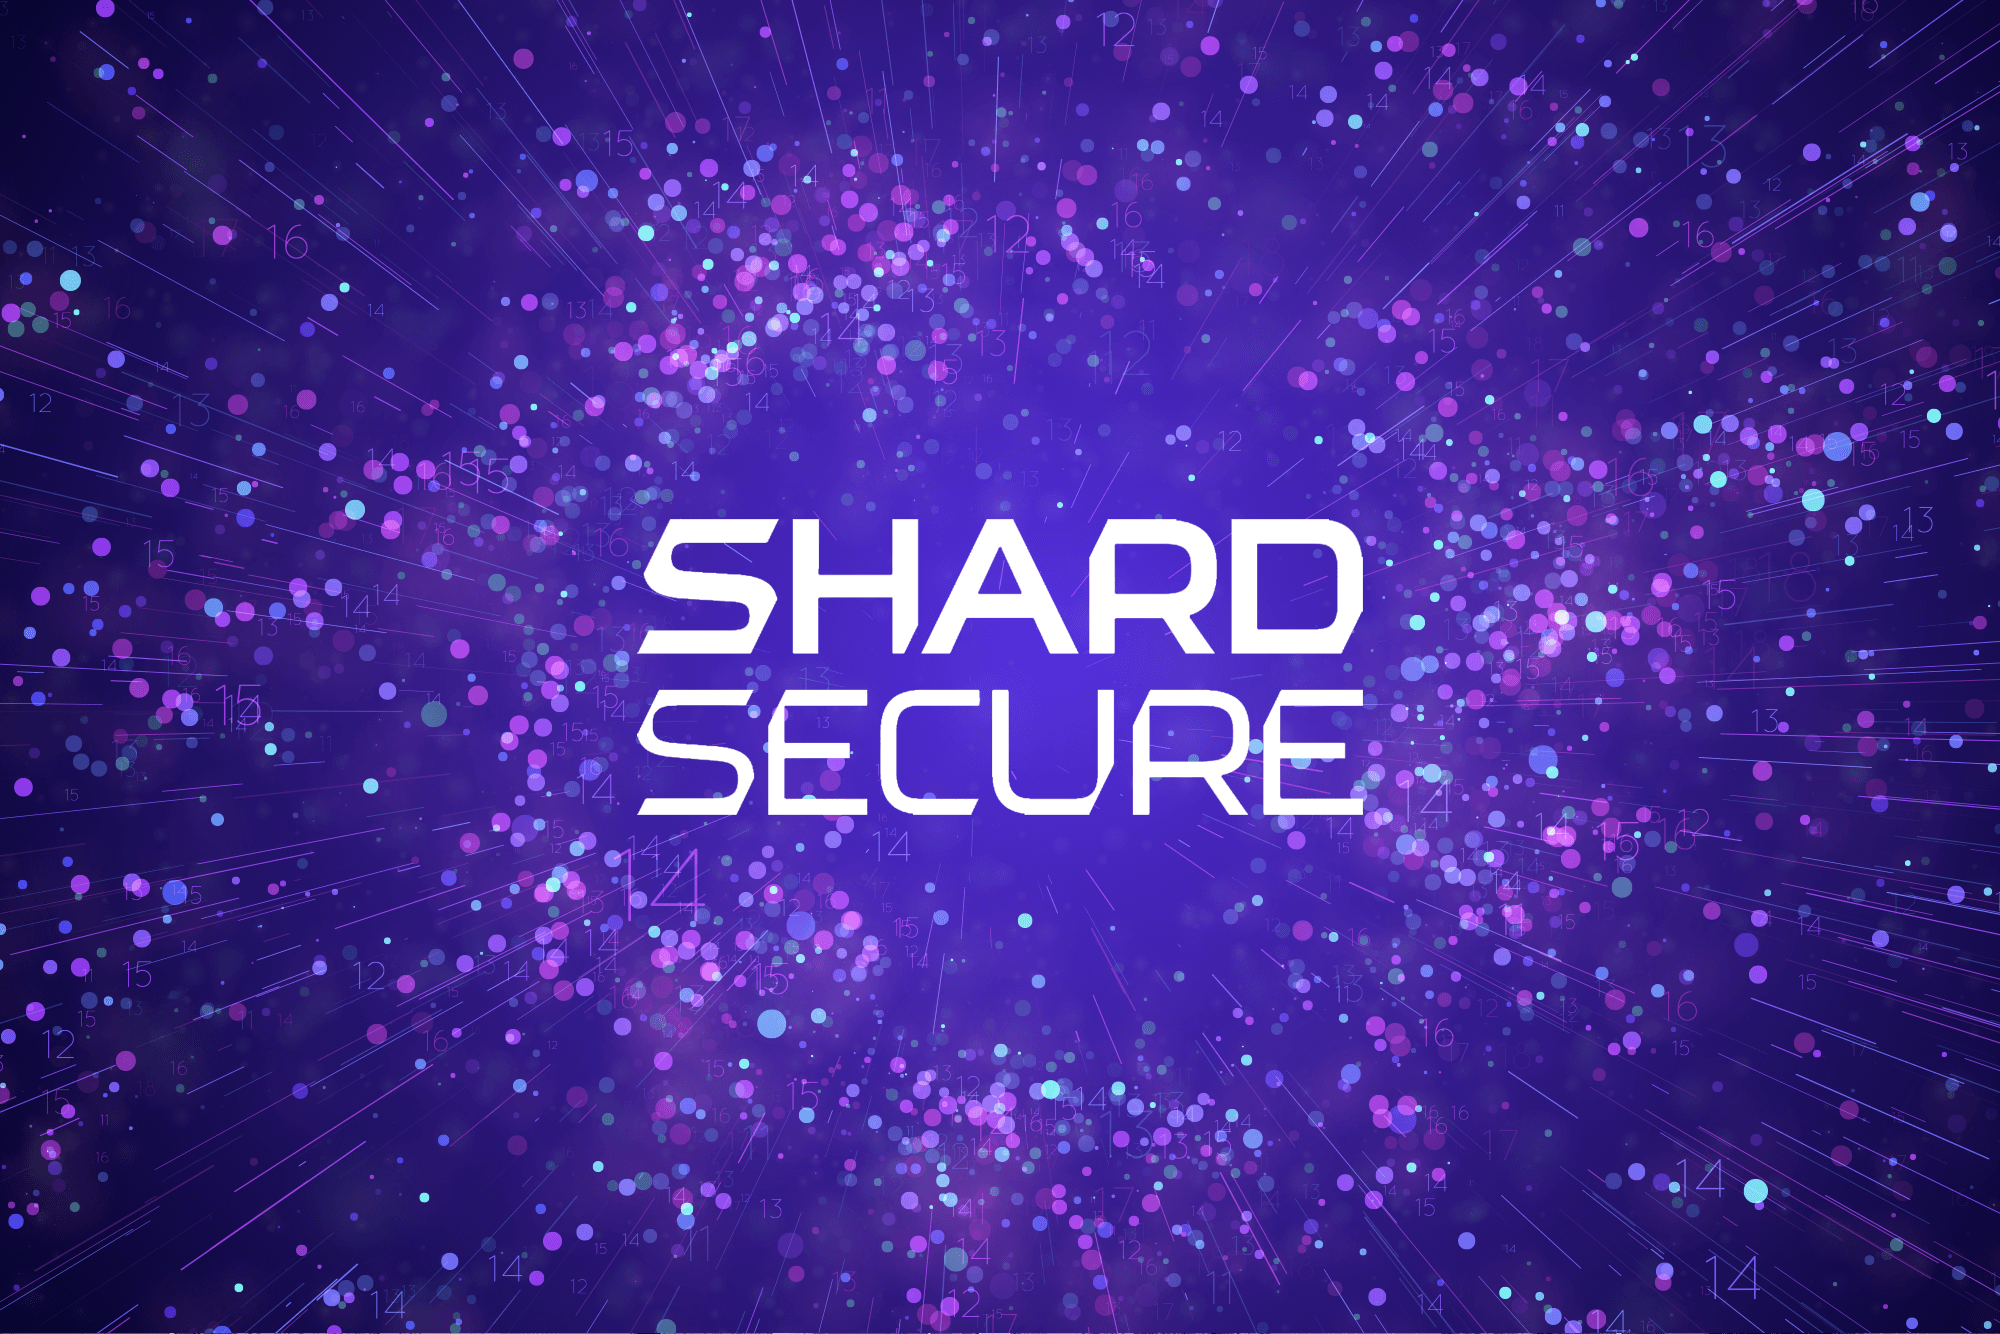 Are You Doing Everything You Can to Protect Your Data in the Cloud? ShardSecure Can Make Sure You Are